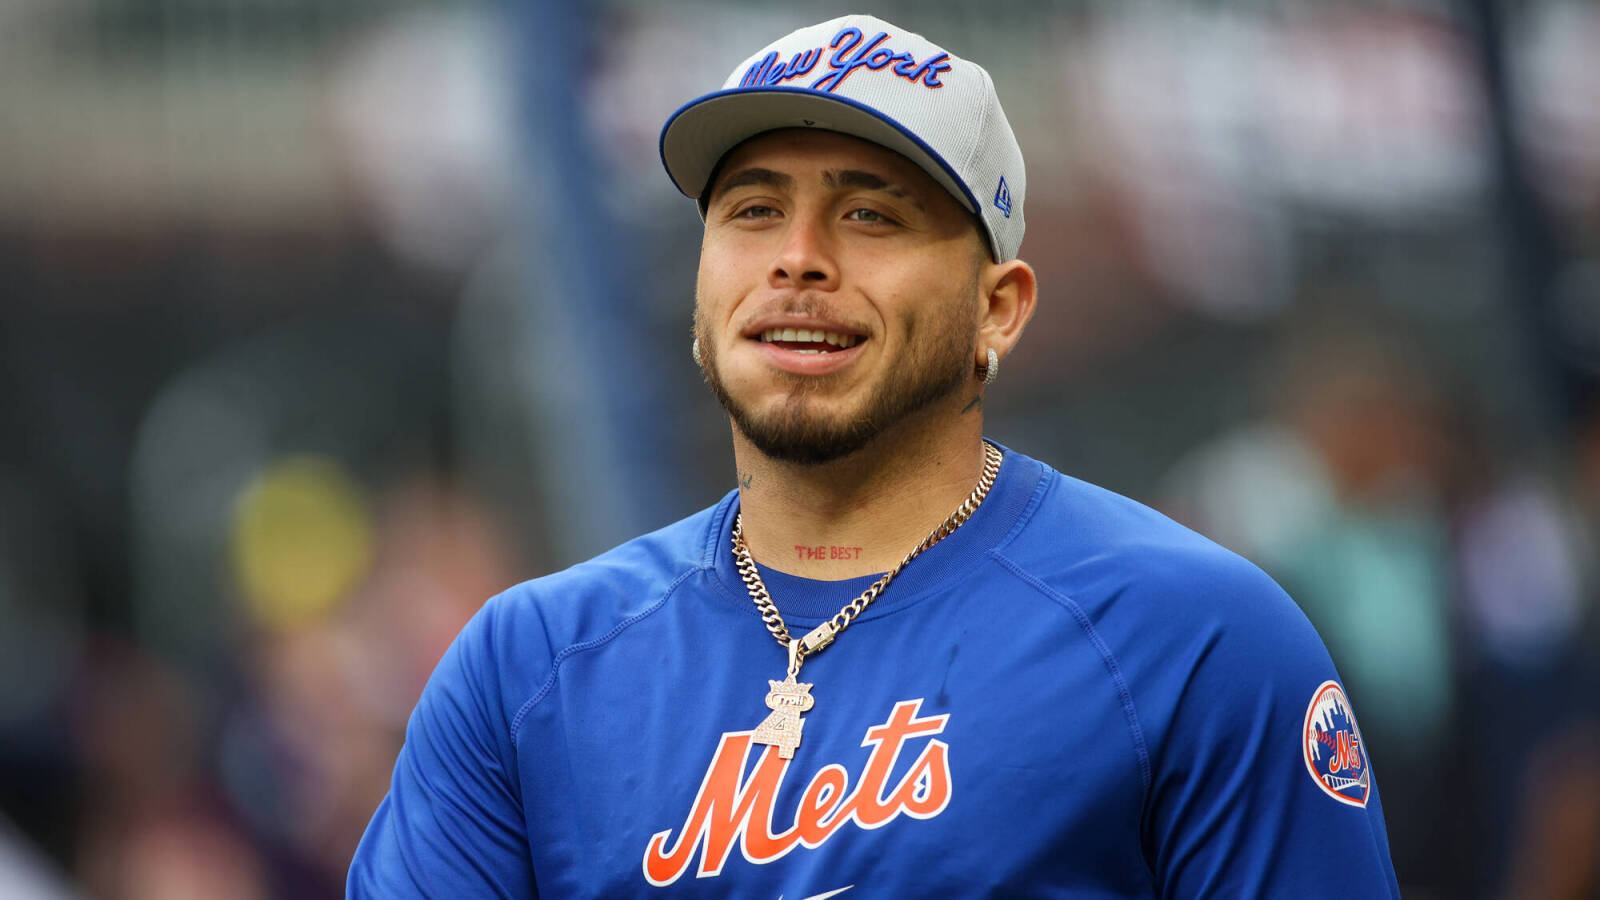 Mets catcher undergoes surgery to repair tear in left thumb